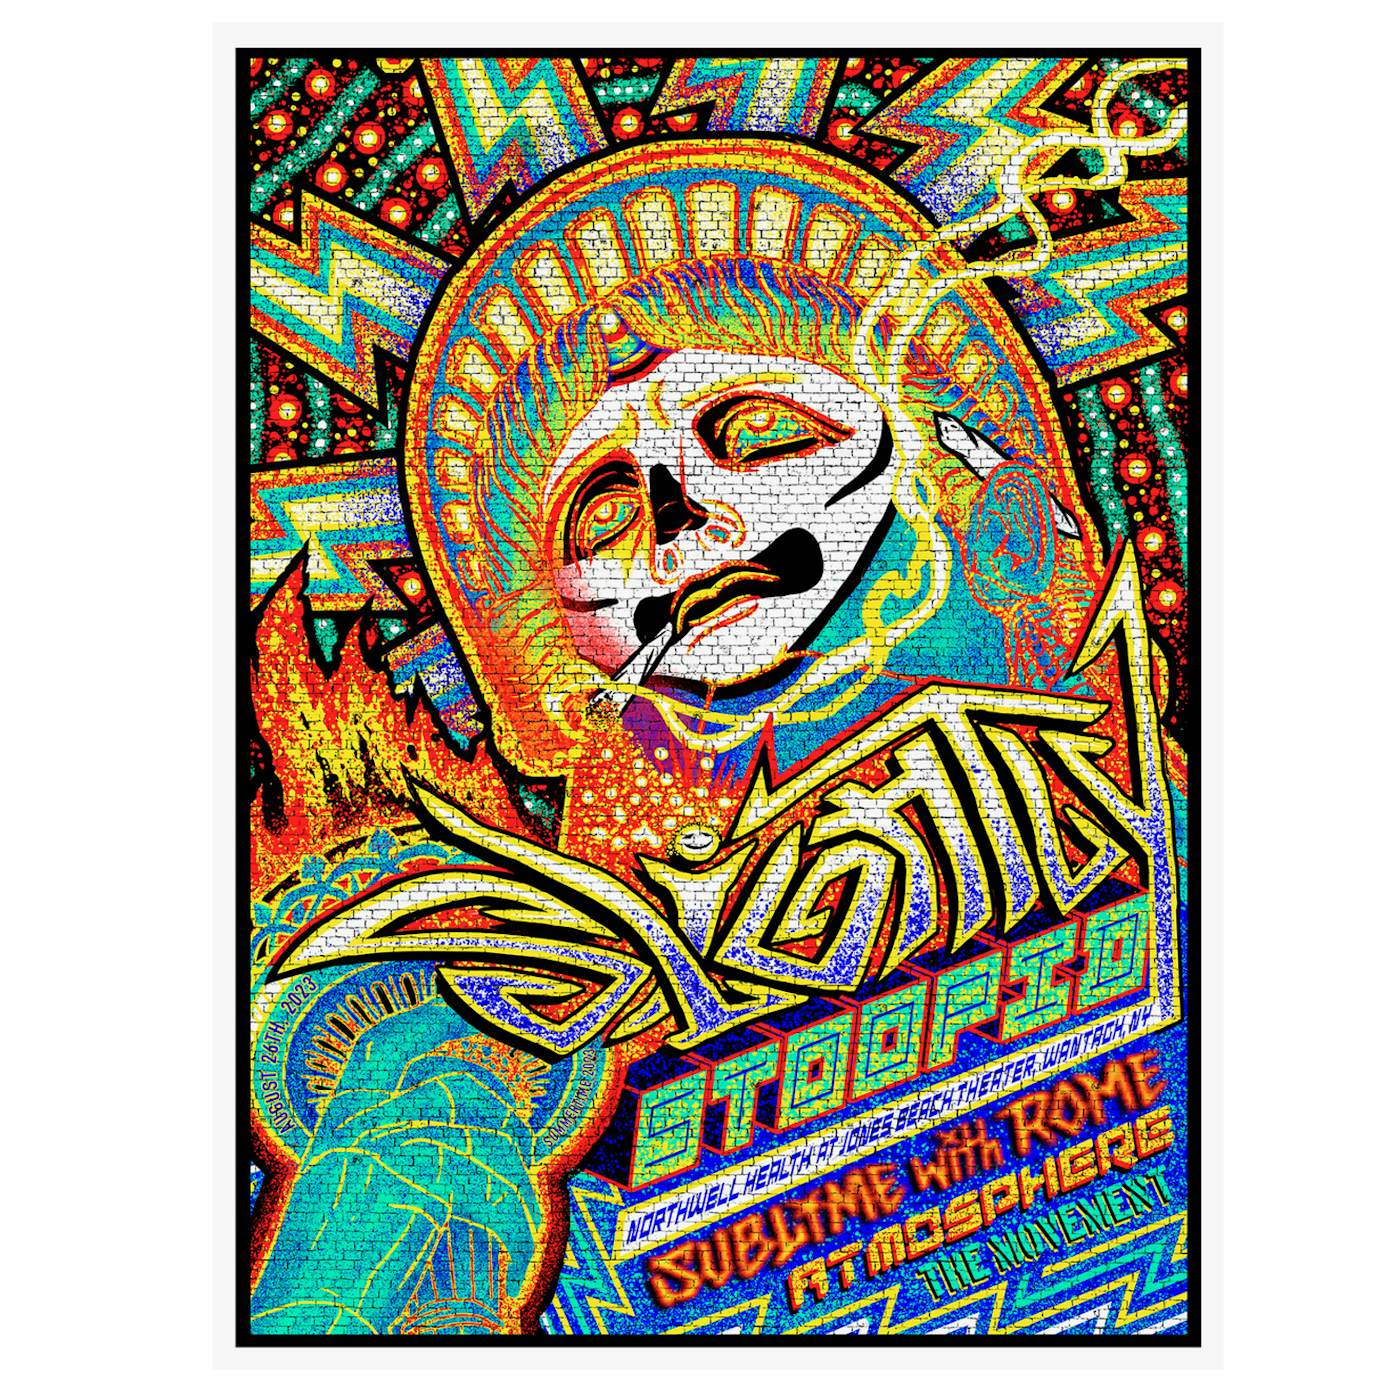 Slightly Stoopid 8/26/23 Wantagh, NY Show Poster by Brad Klausen (Well Traveled)